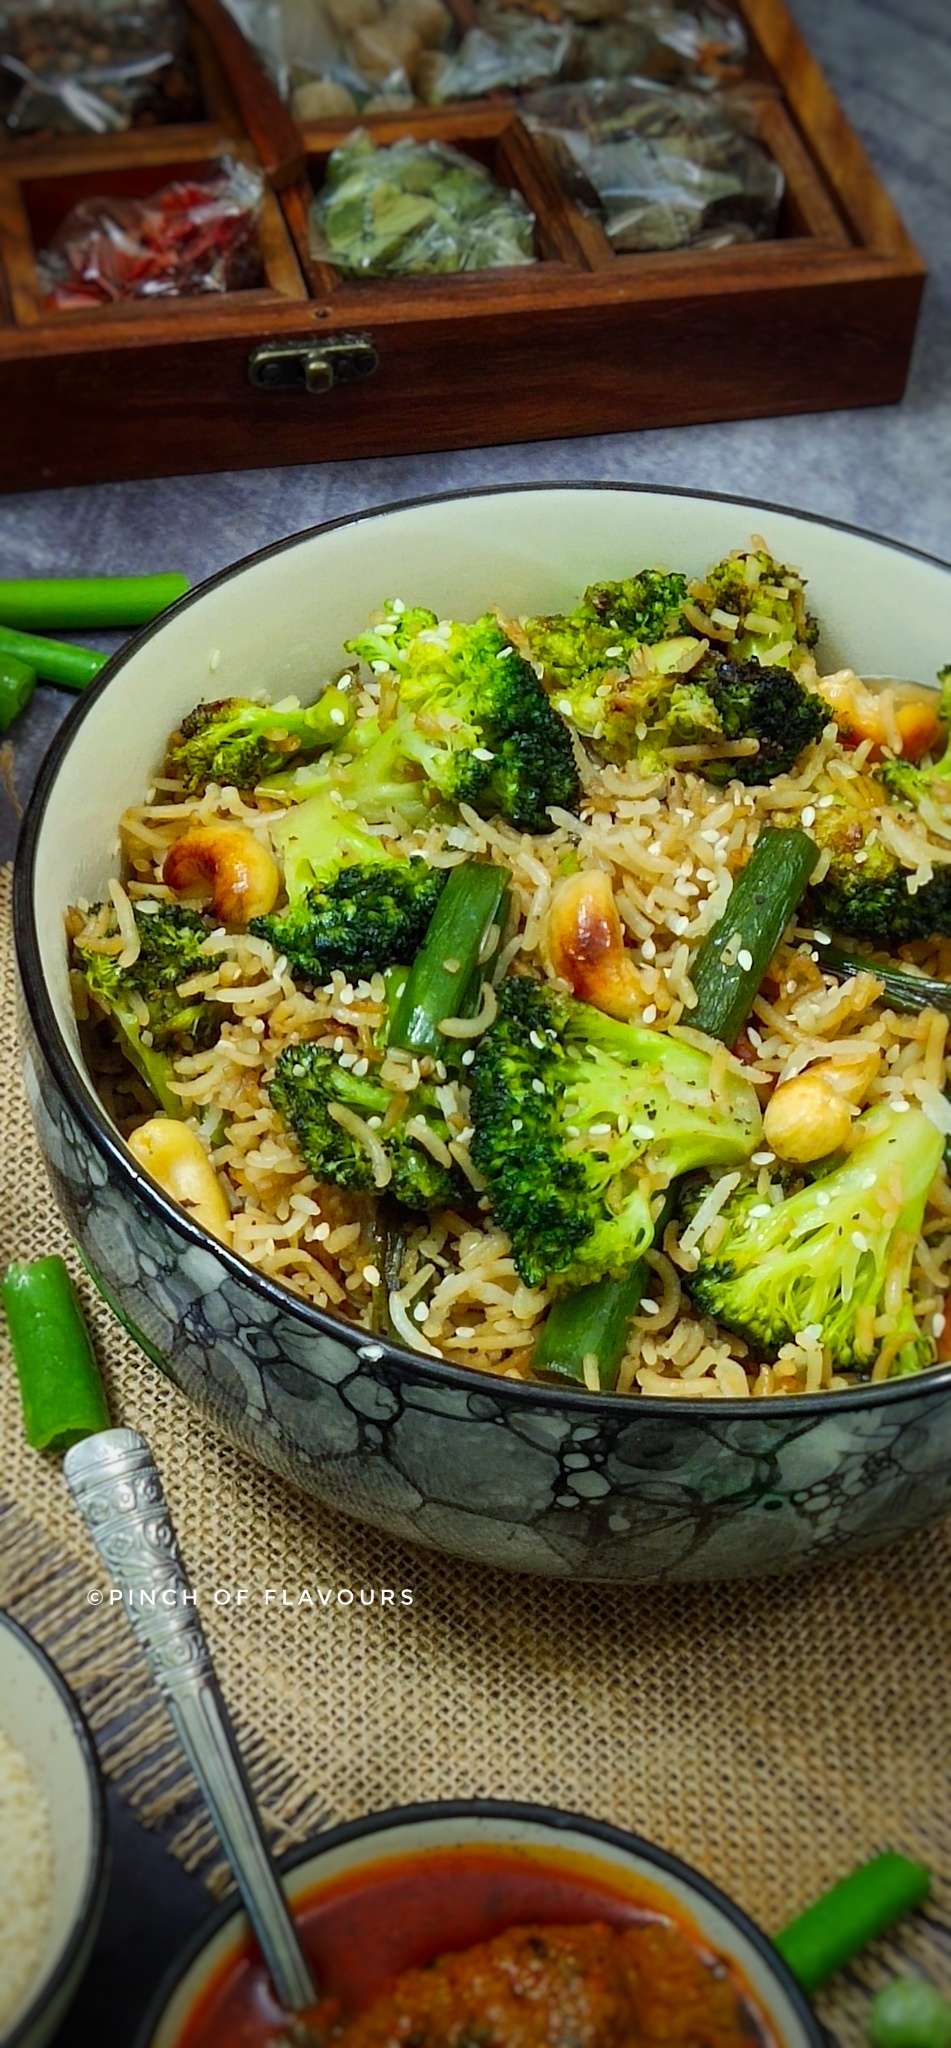 30 MINUTES BROCCOLI FRIED RICE